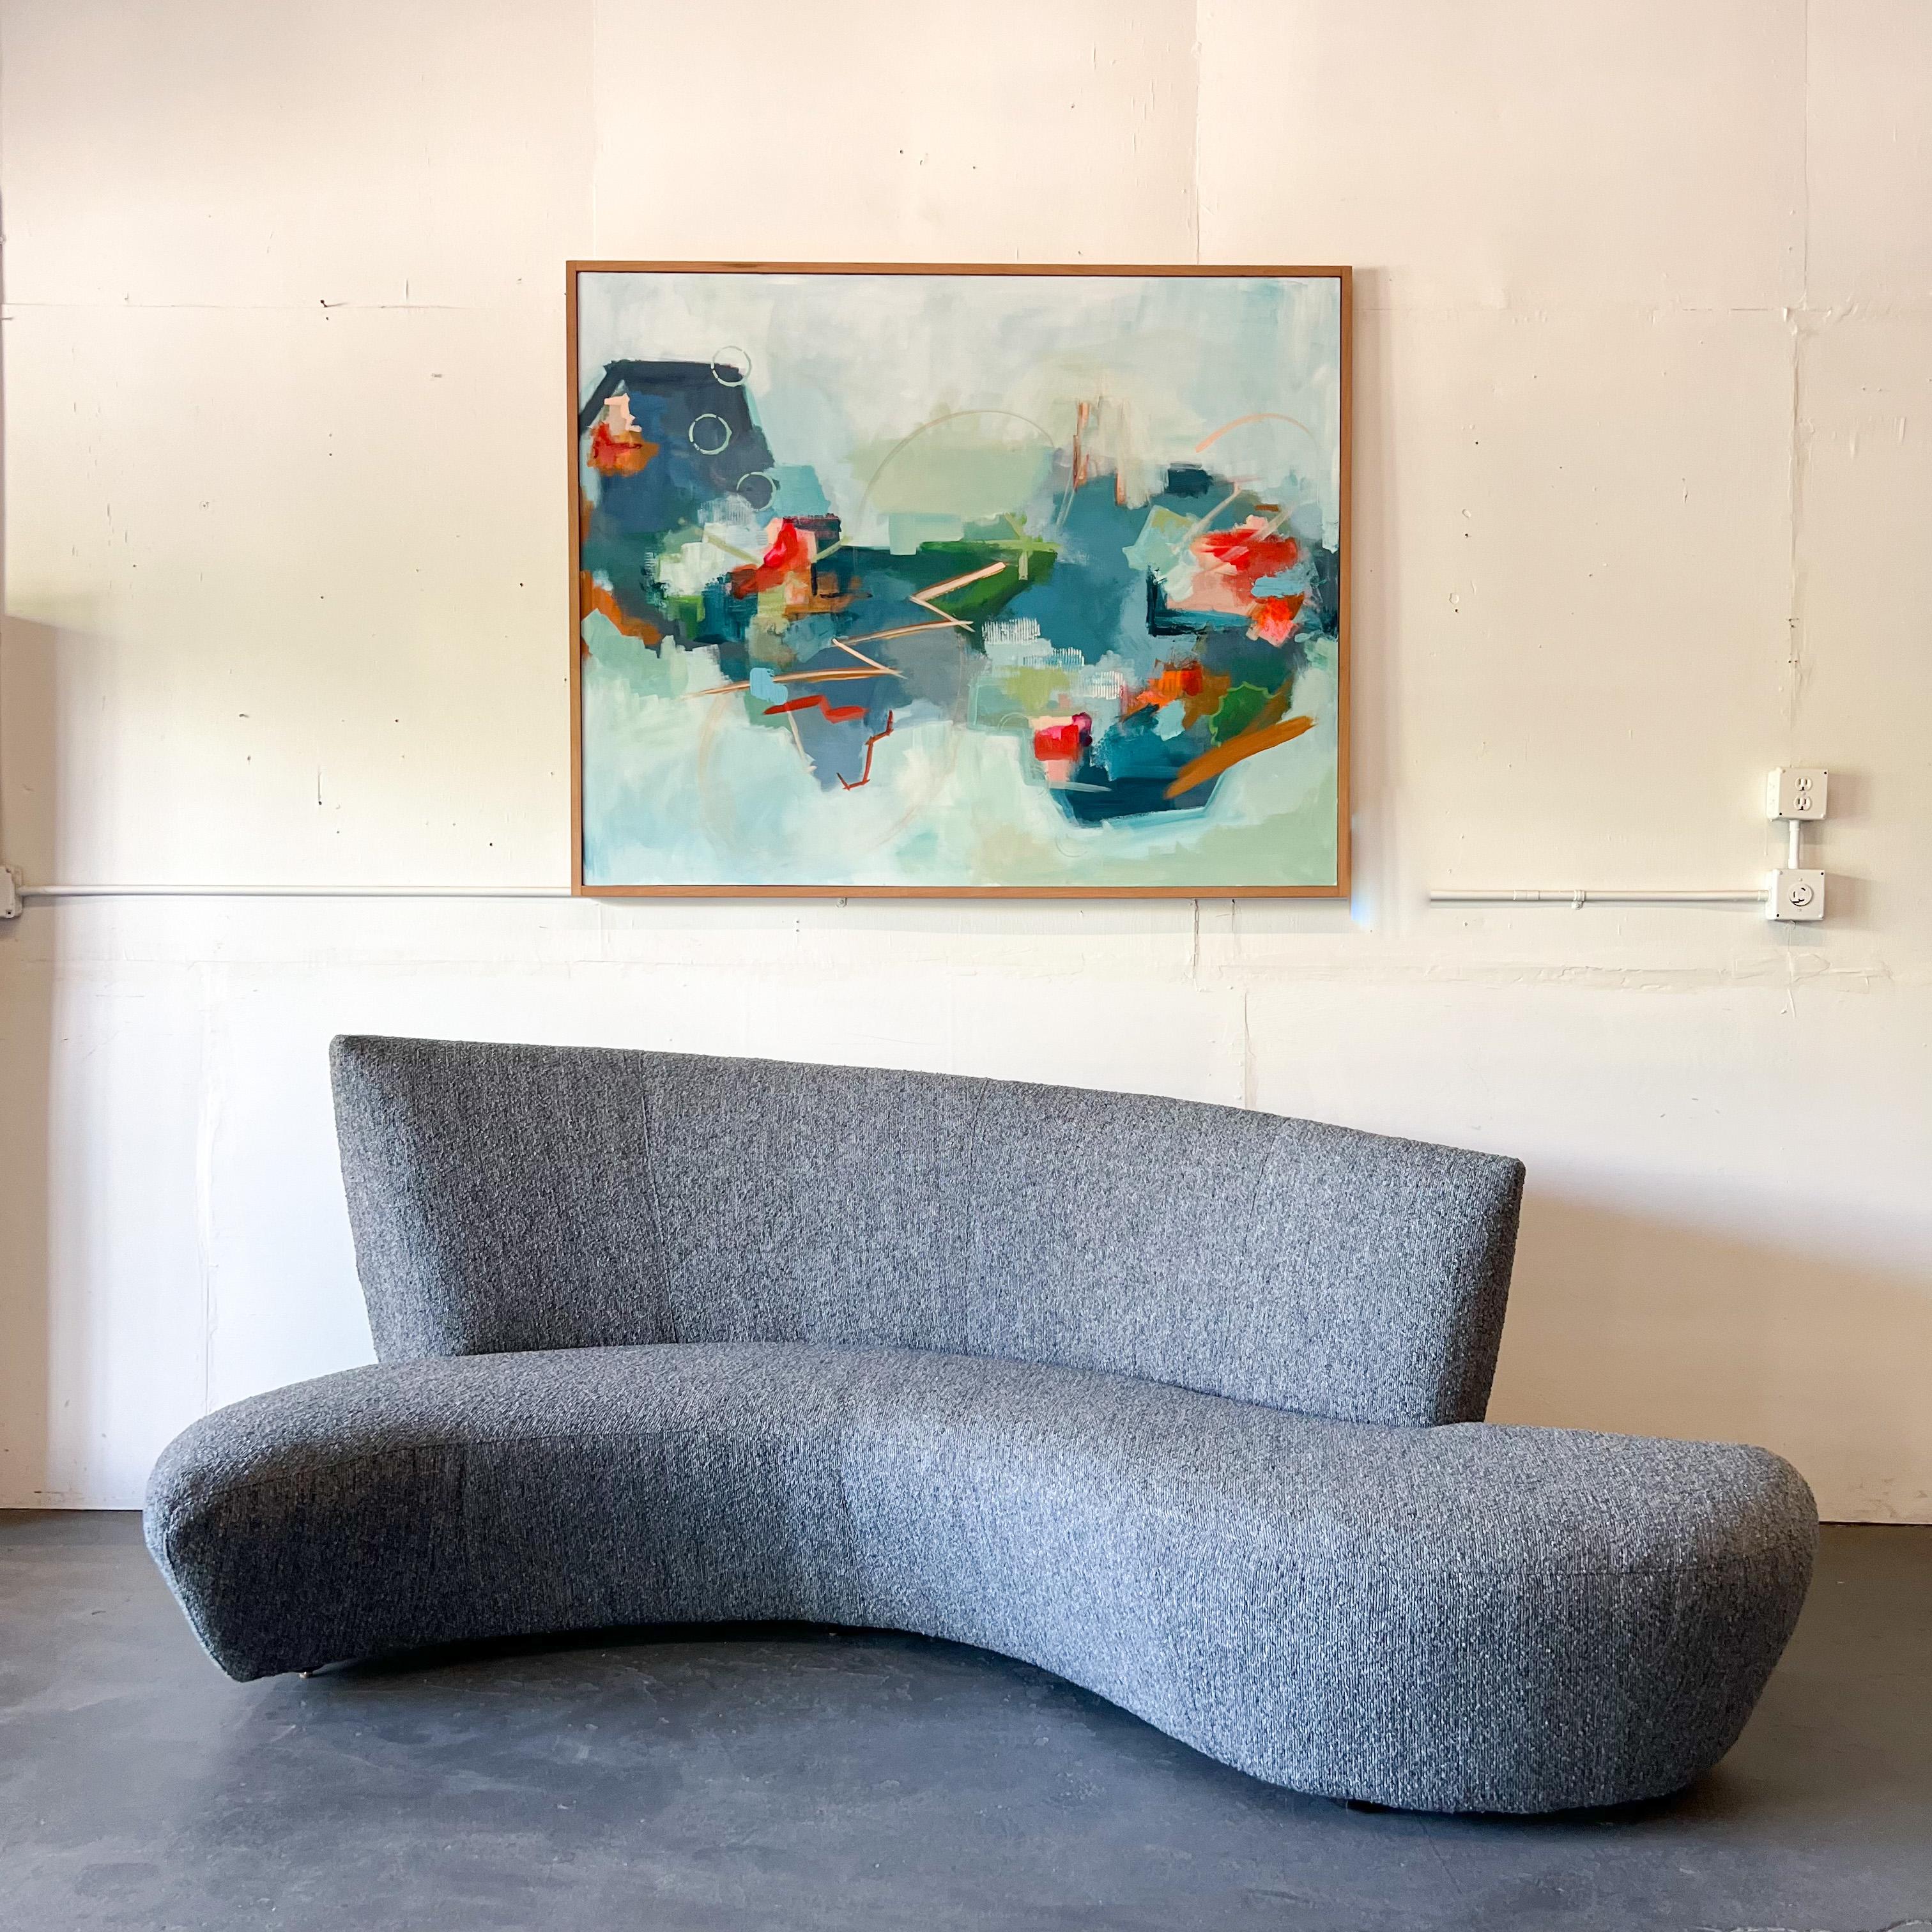 Pair of Mid-Century Modern style Bilbao Serpentine sofas designed after Vladimir Kagan and inspired by the curves and undulations of the Guggenheim Museum in Bilbao Spain. These sofas have new blue/grey tweed upholstery and self-leveling feet.